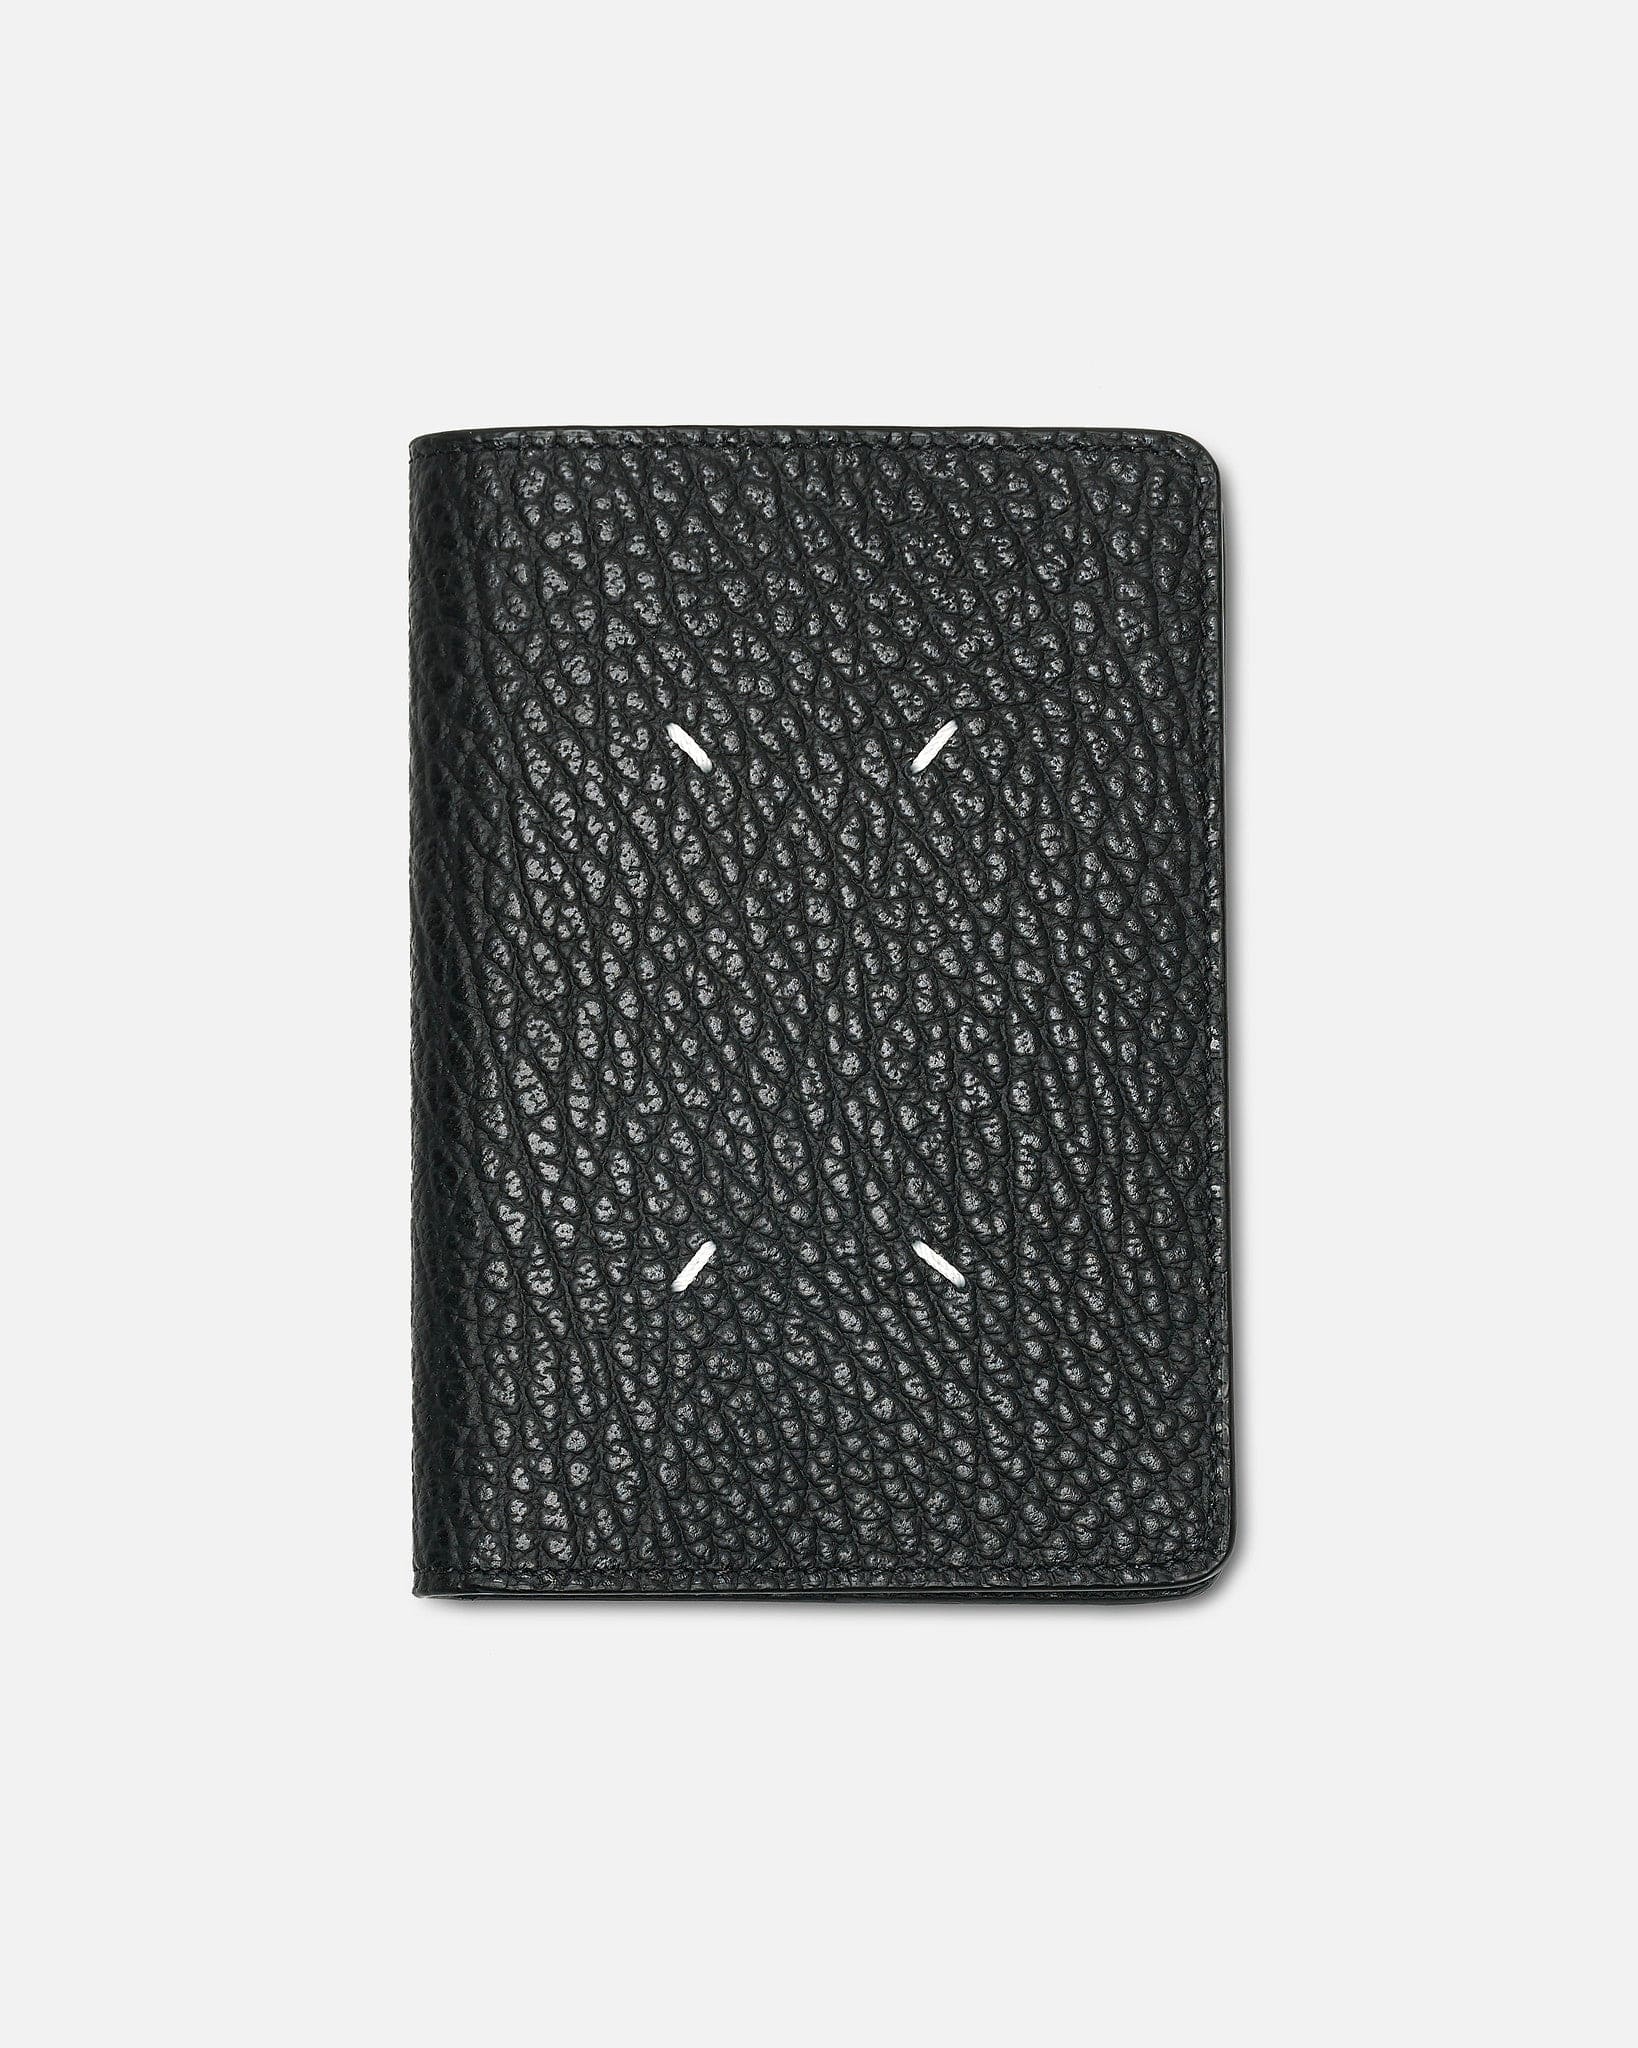 Grainy Leather Passport Cover in Black